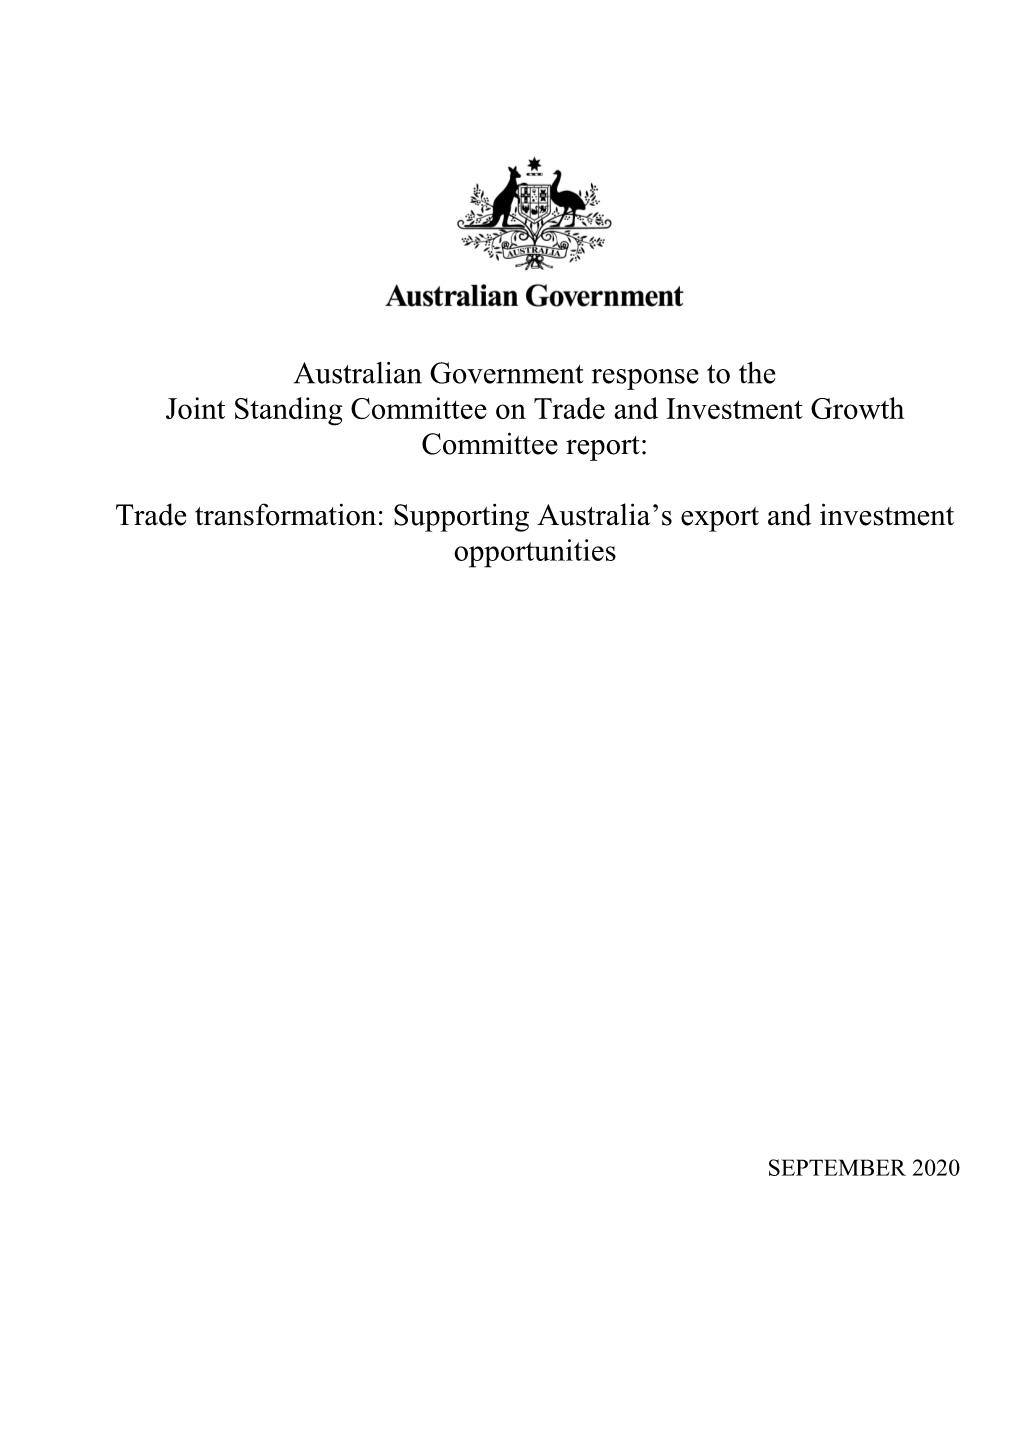 Australian Government Response to the Joint Standing Committee on Trade and Investment Growth Committee Report